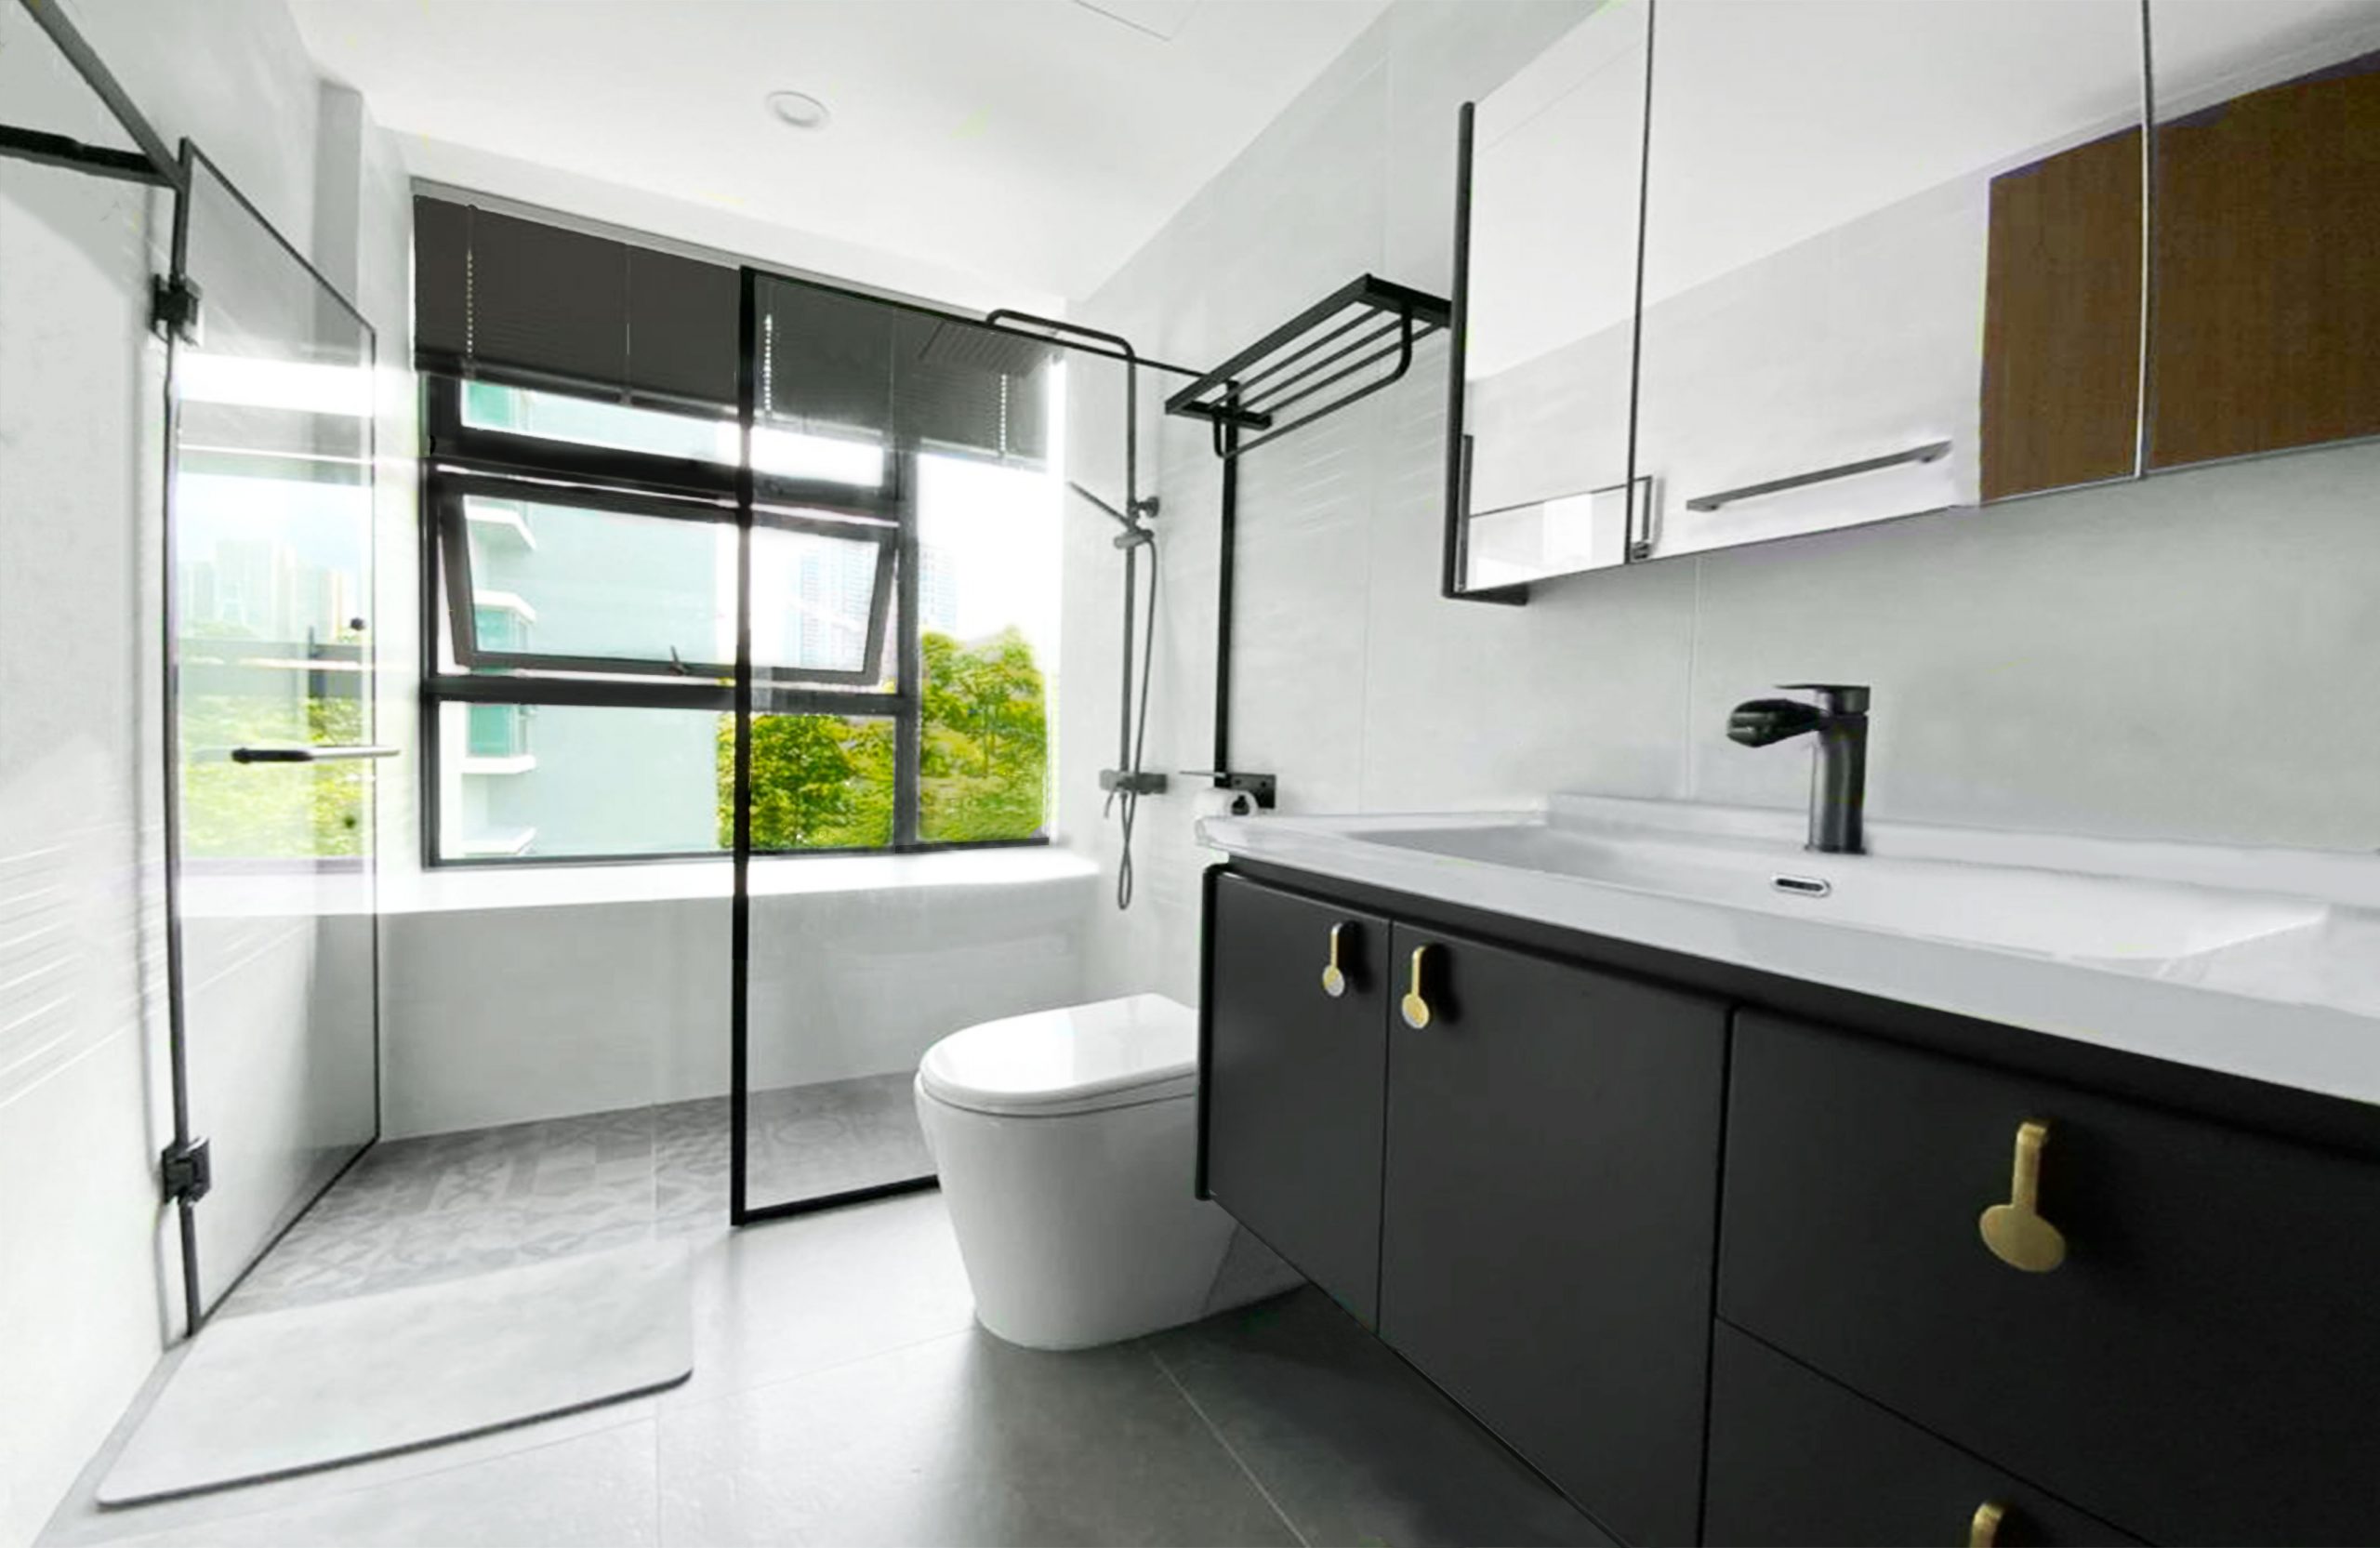 Hundred Trees Condo Black Frame Swing Door Toilet Renovation Modern Contemporary Interior Design with Vanity and Mirror